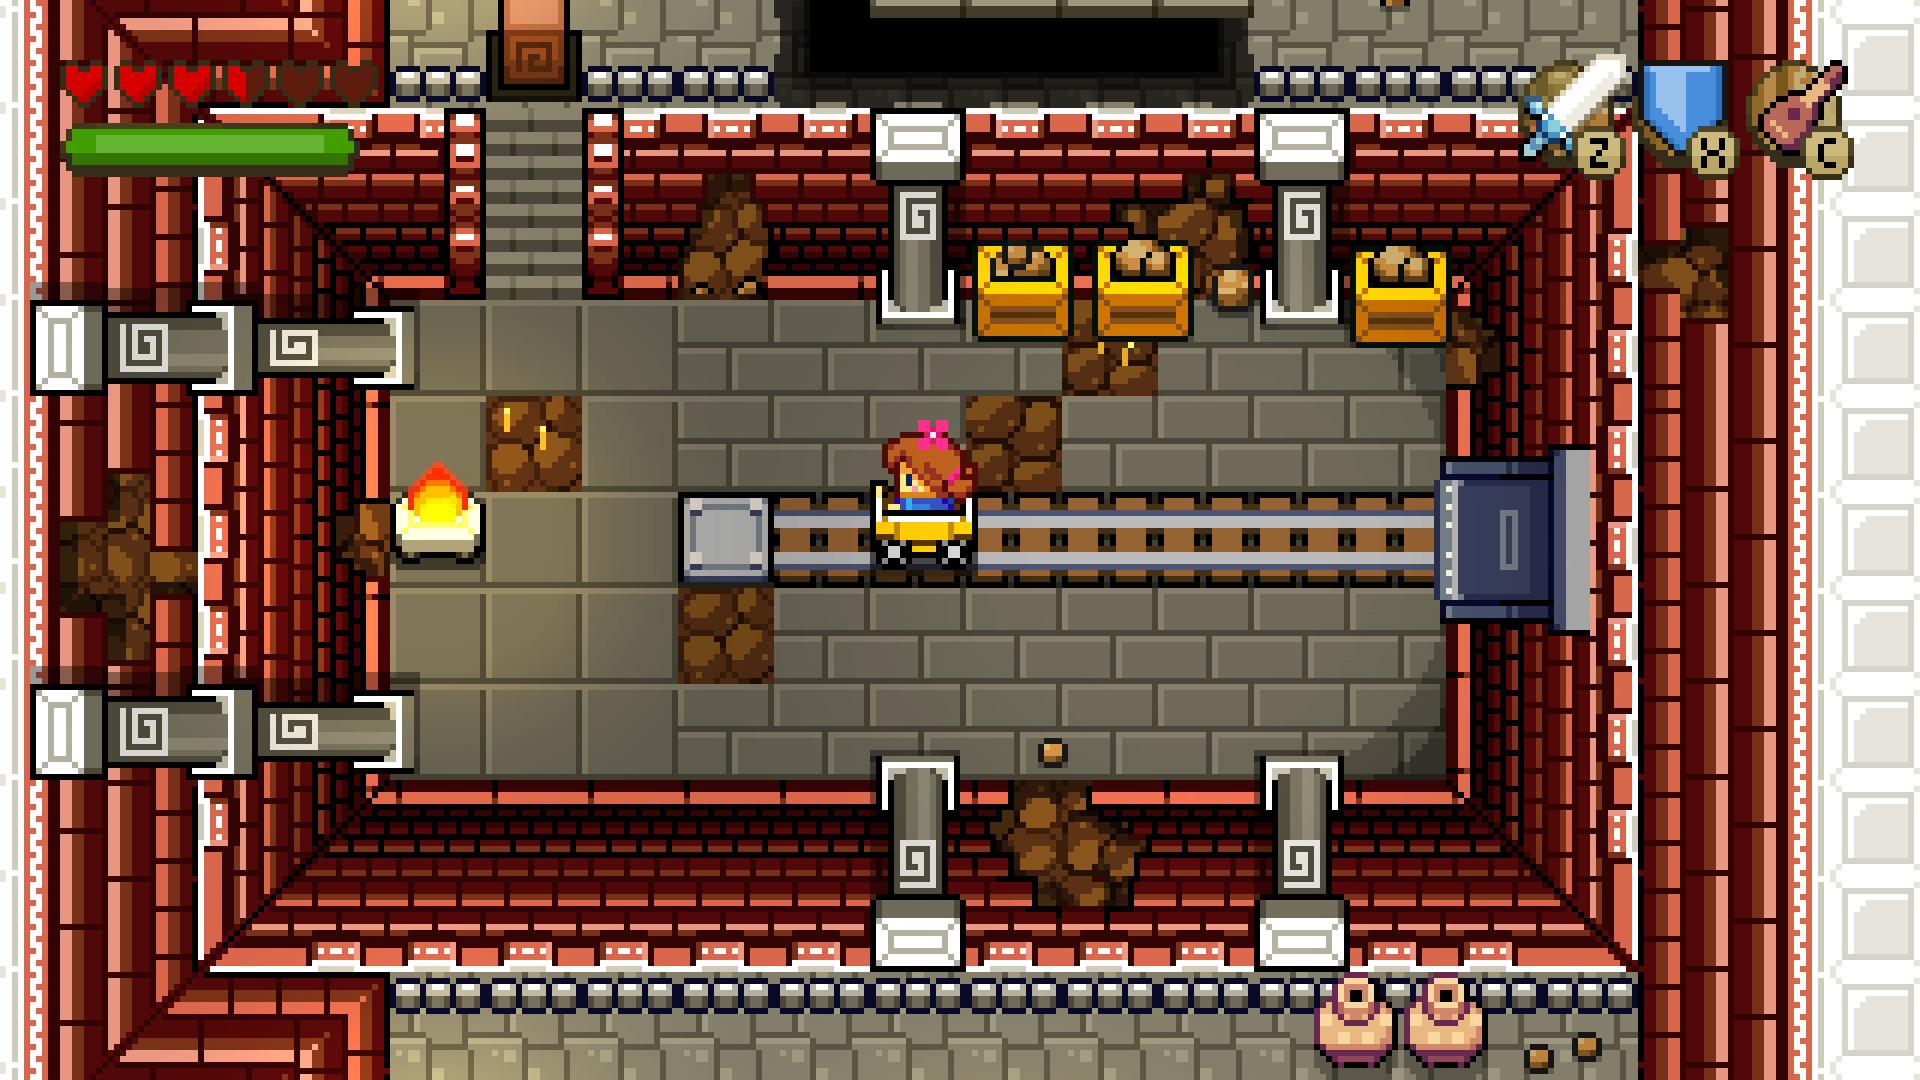 Blossom Tales II - a young girl rides on a minecart in a dungeon